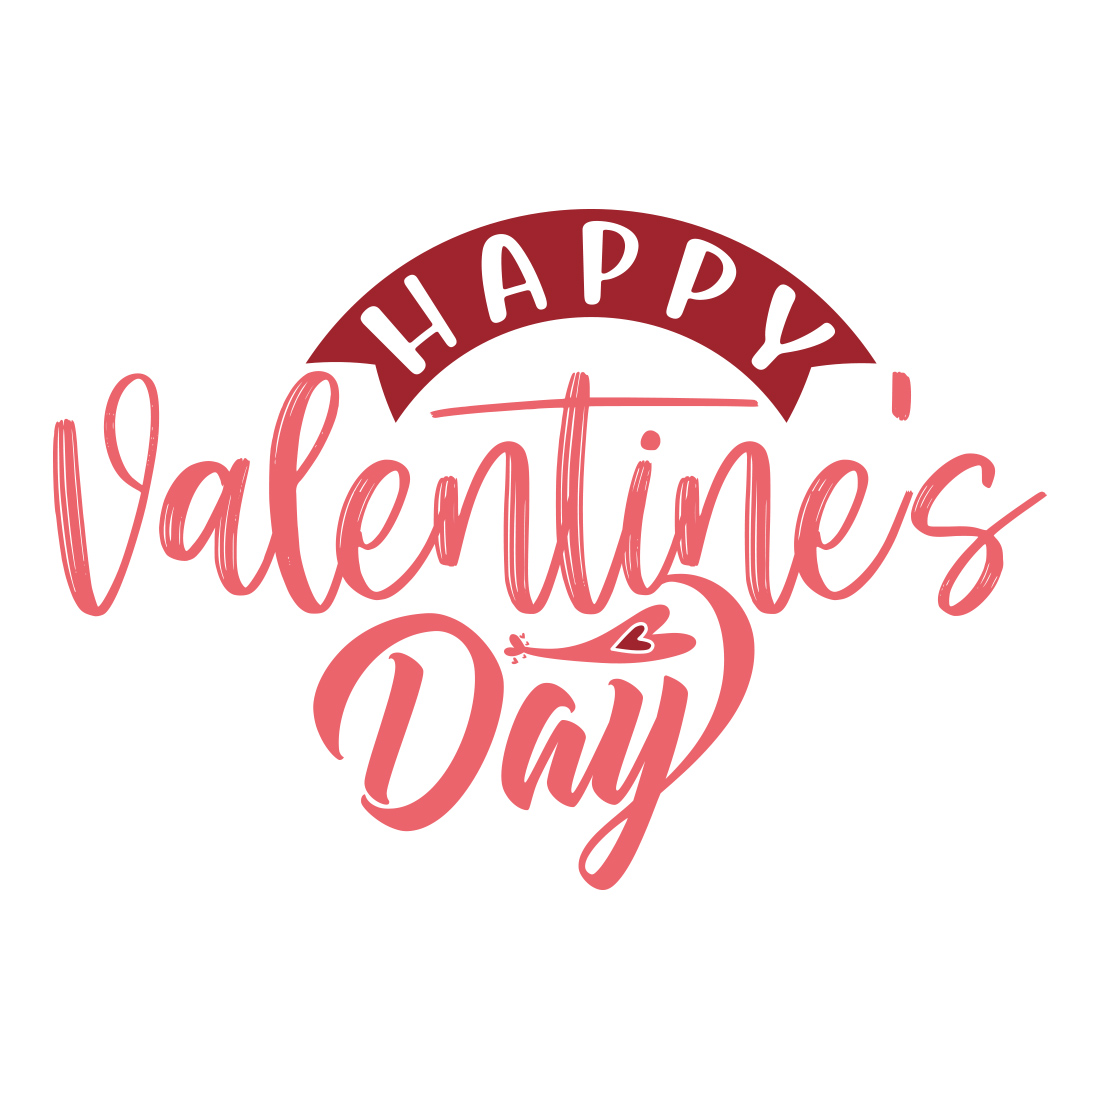 Image with amazing printable lettering Happy Valentines Day